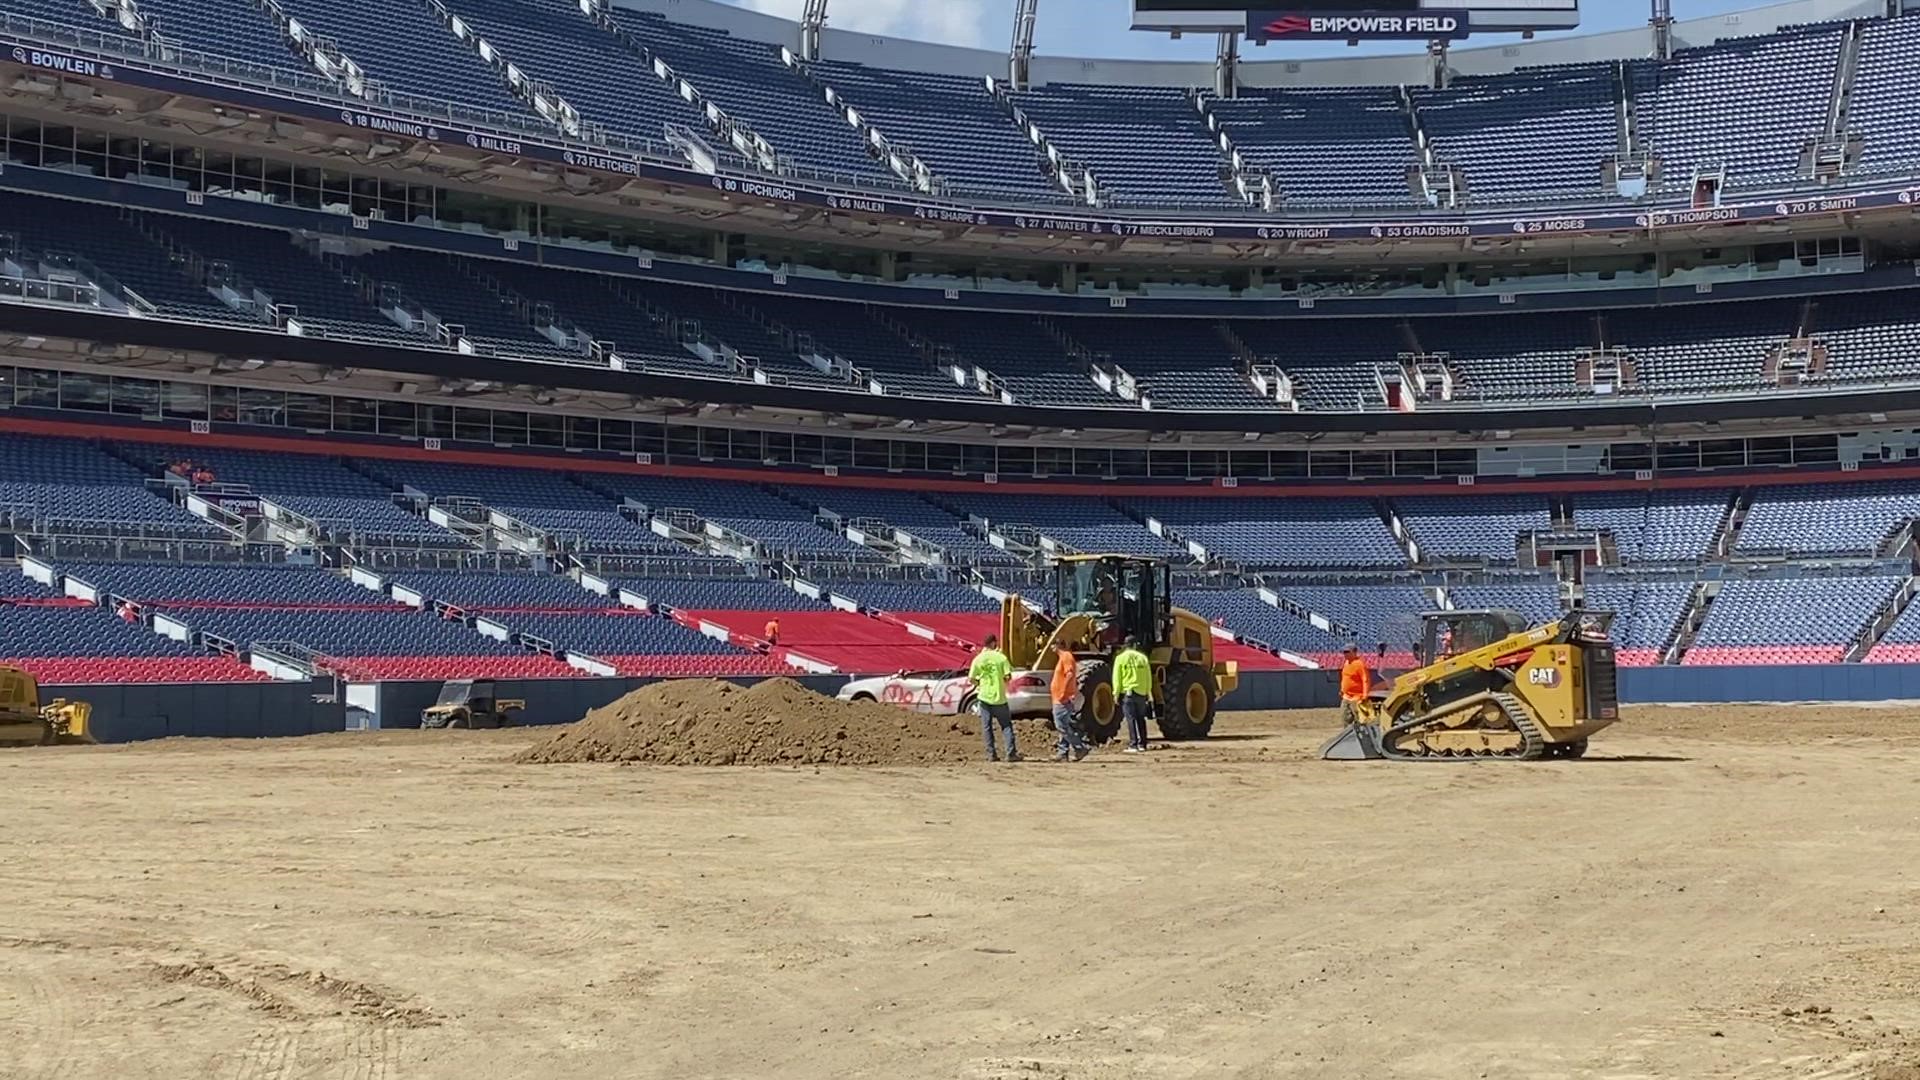 Monster Energy Supercross and Monster Jam return to Empower Field at Mile High after a 3-year pandemic hiatus for back-to-back events in Denver.